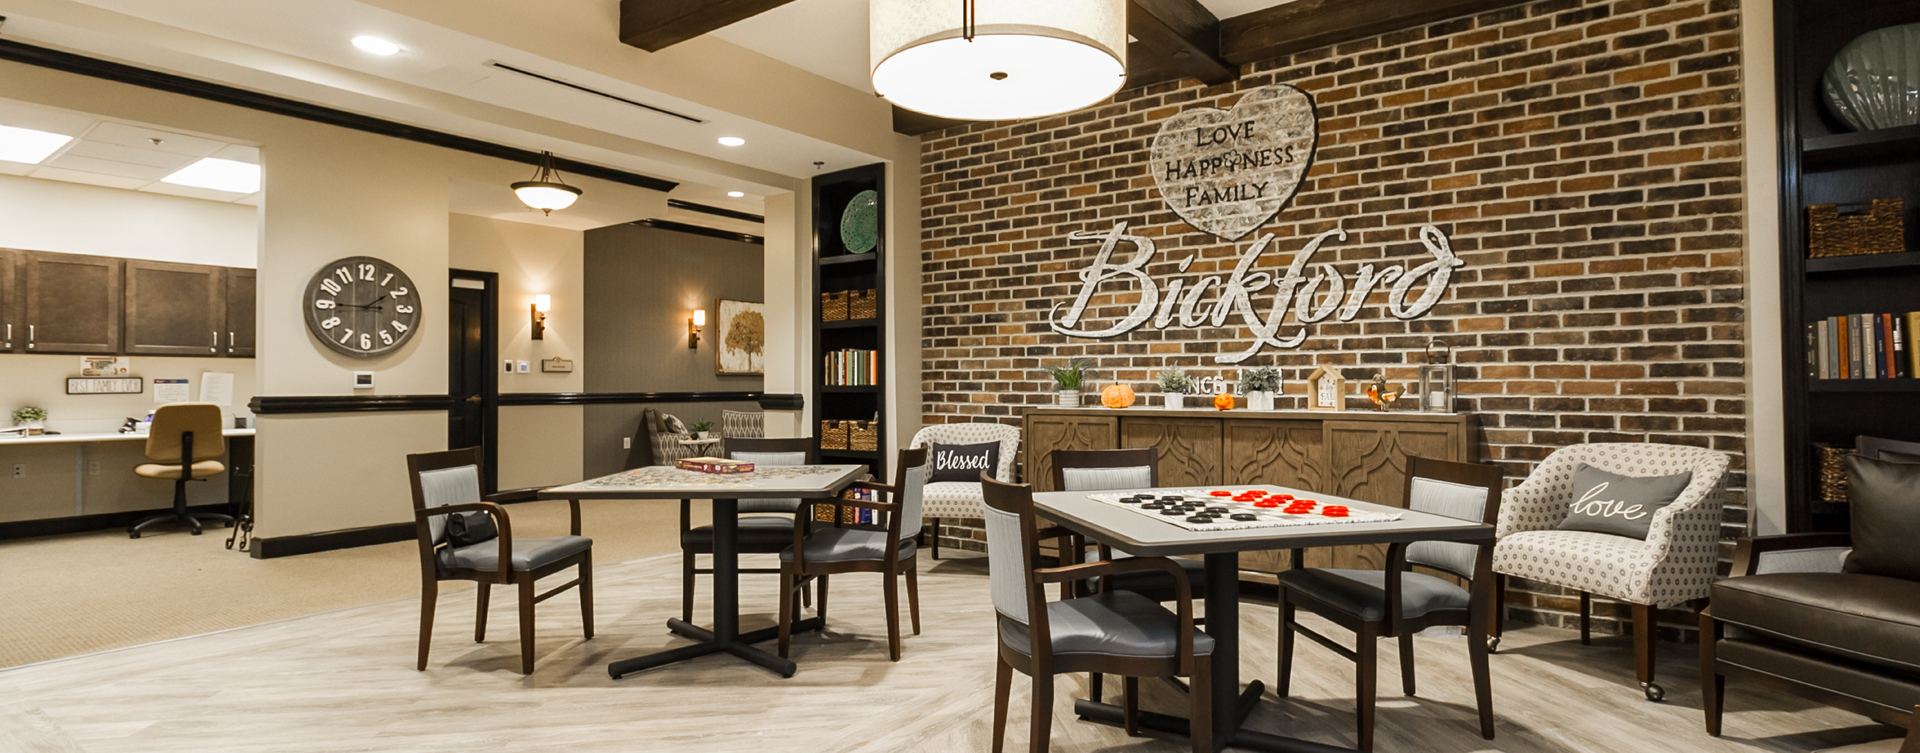 Unleash your creative side in the activity room at Bickford of Virginia Beach